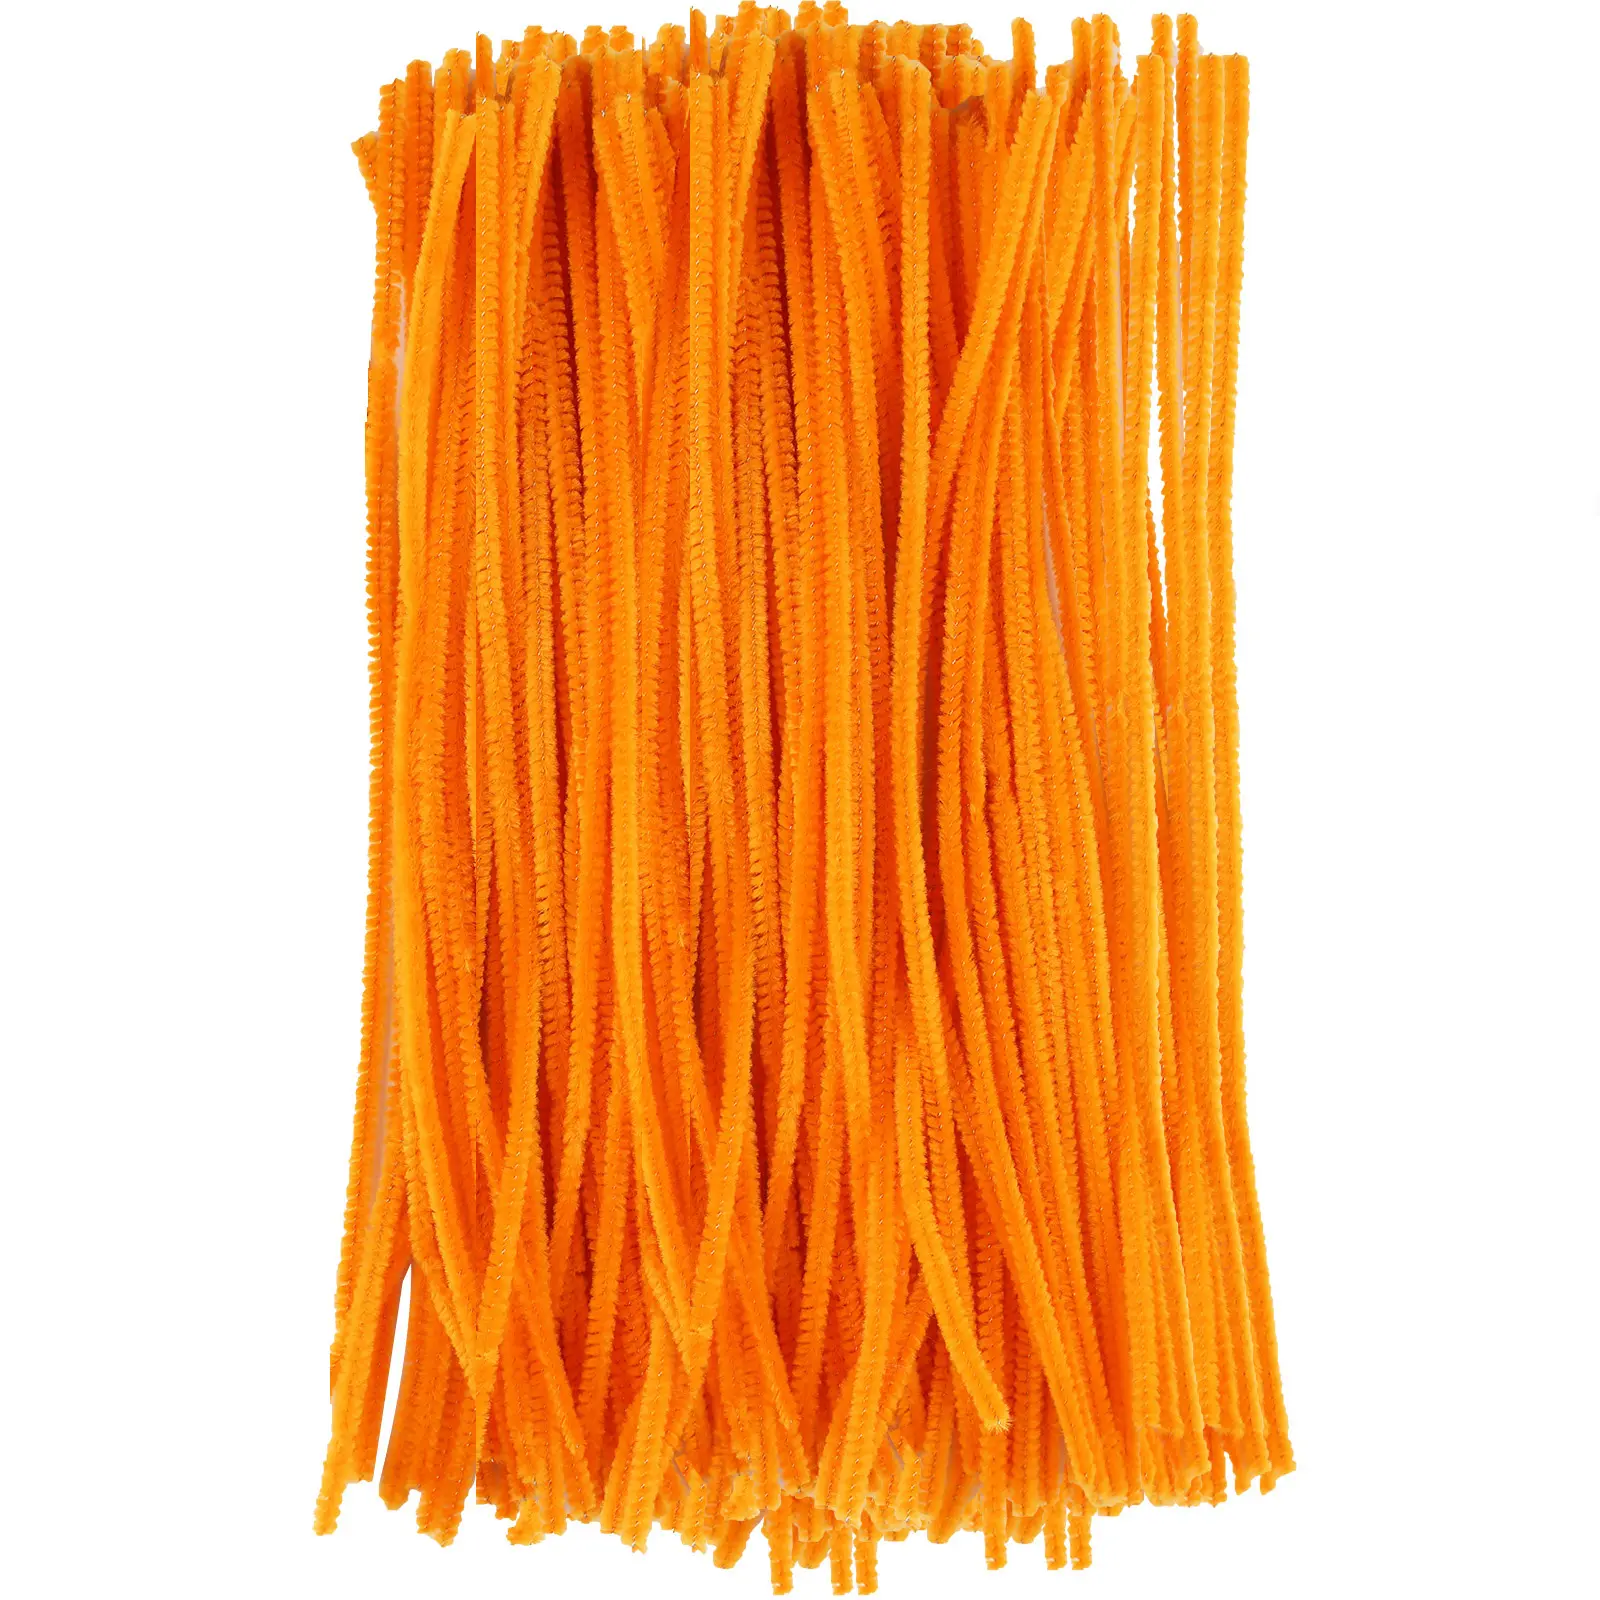 Most Selling Products chenille stems pipe cleaners arts and craft 150pcs gold pipe cleaners